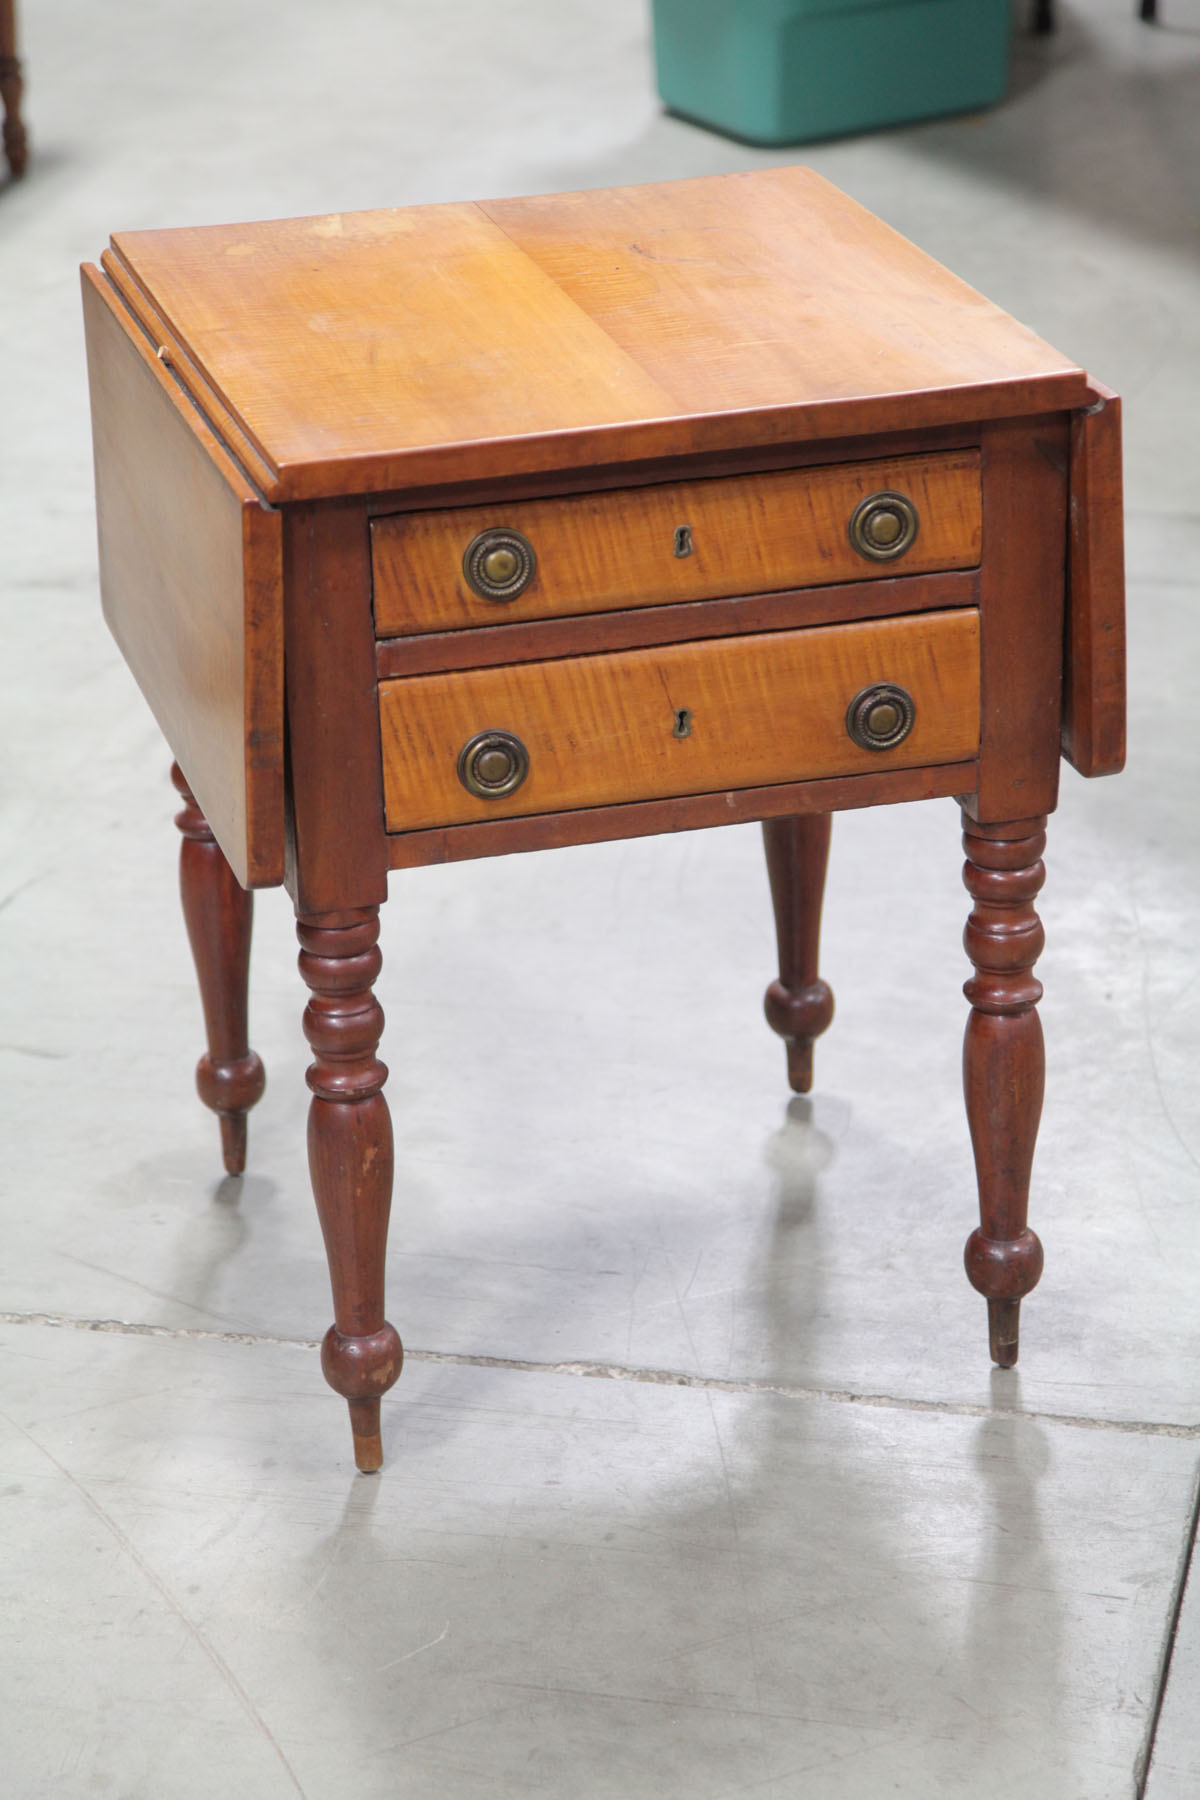 TWO DRAWER DROP LEAF STAND.  American